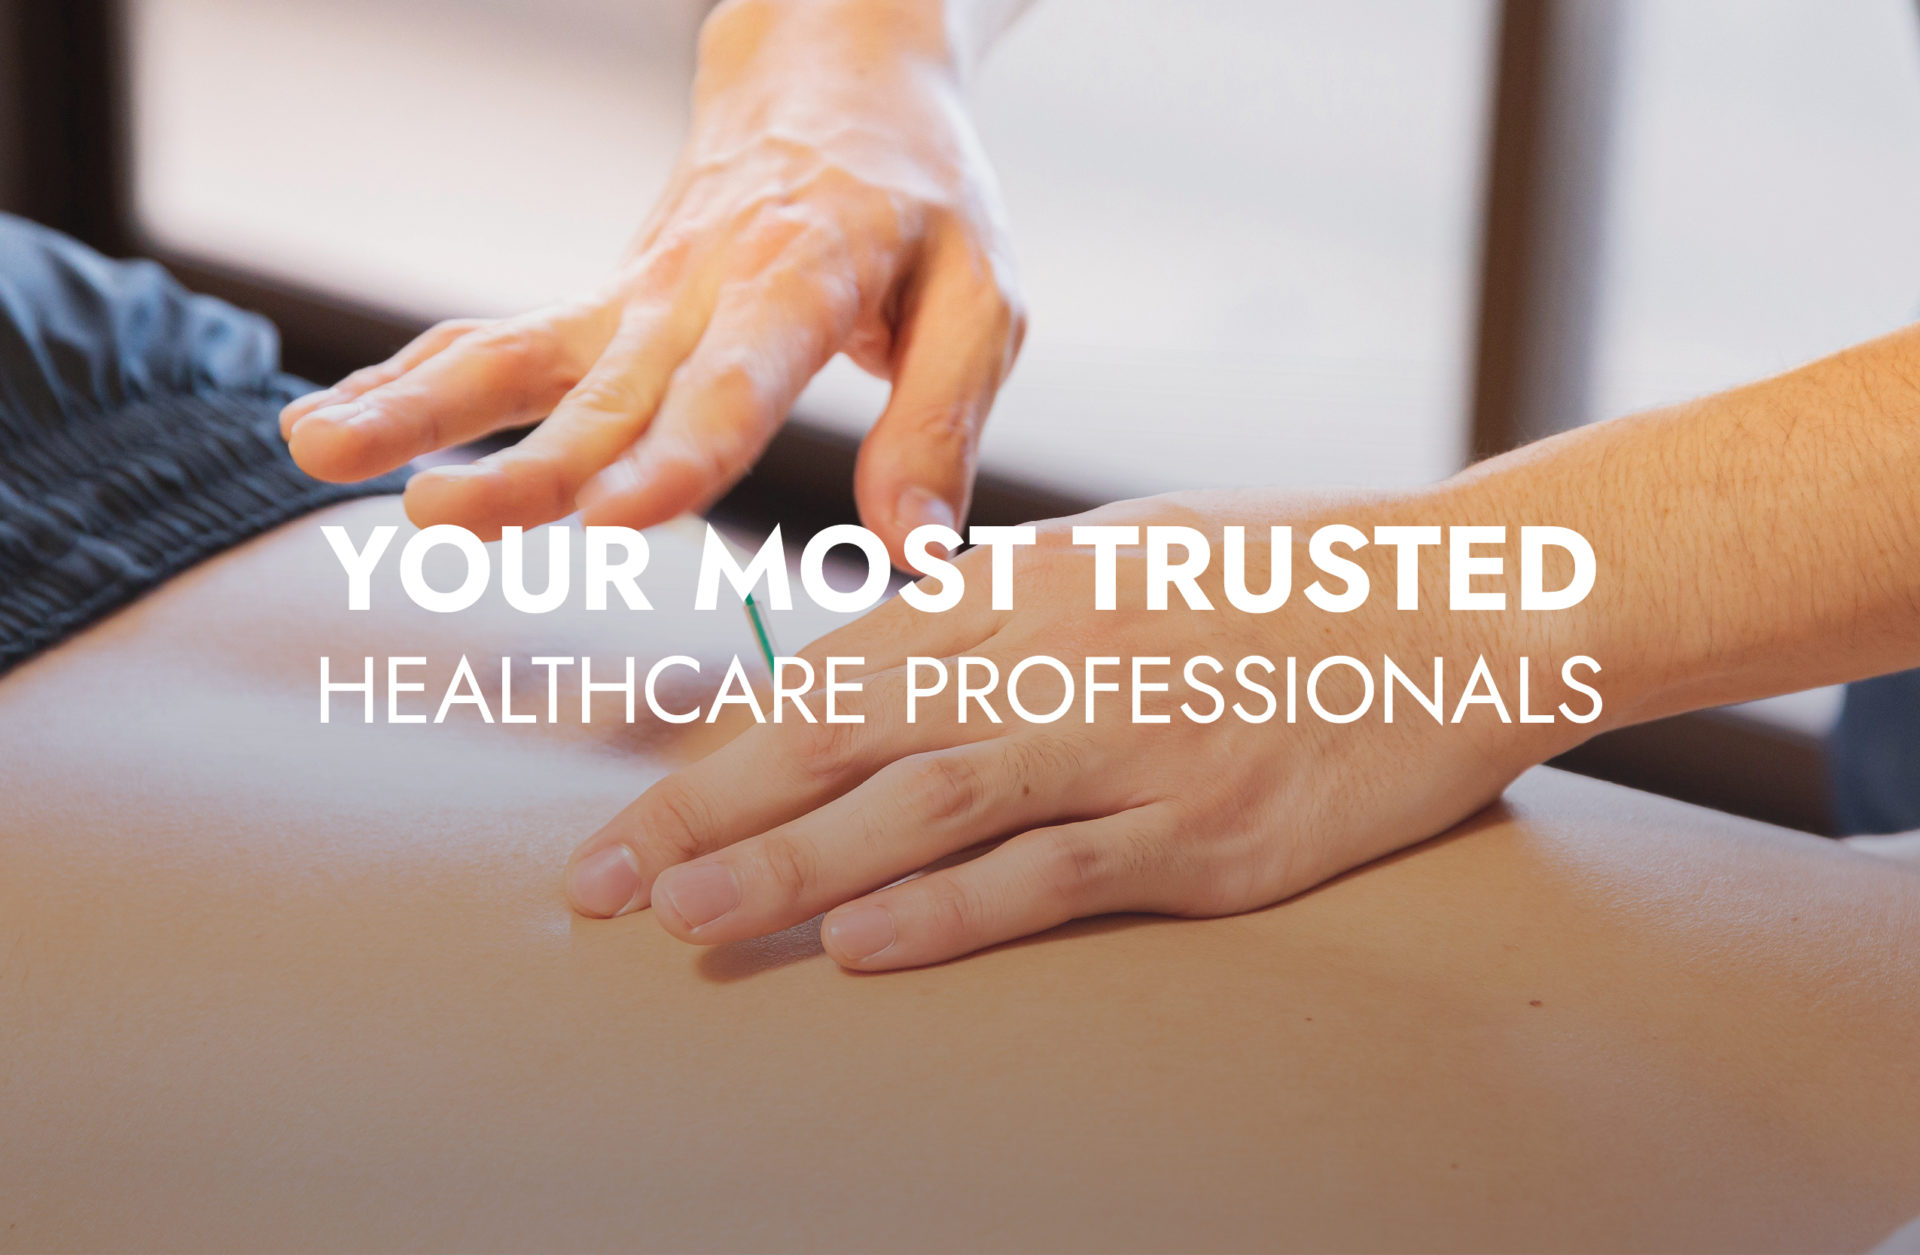 Your most trusted healthcare professionals text featured image for coast physiotherapy